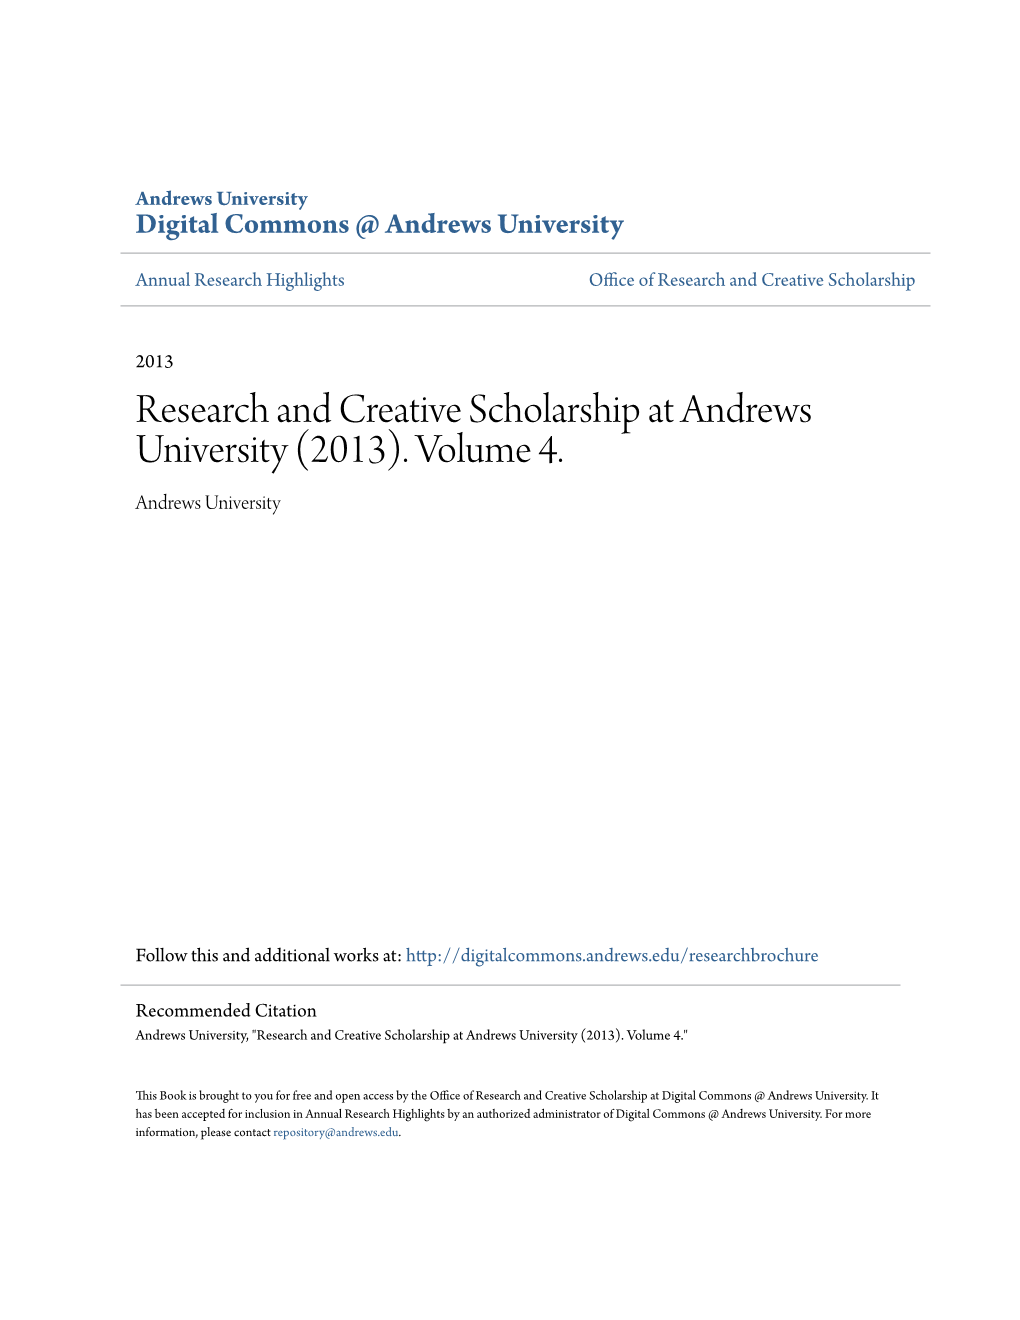 Research and Creative Scholarship at Andrews University (2013). Volume 4